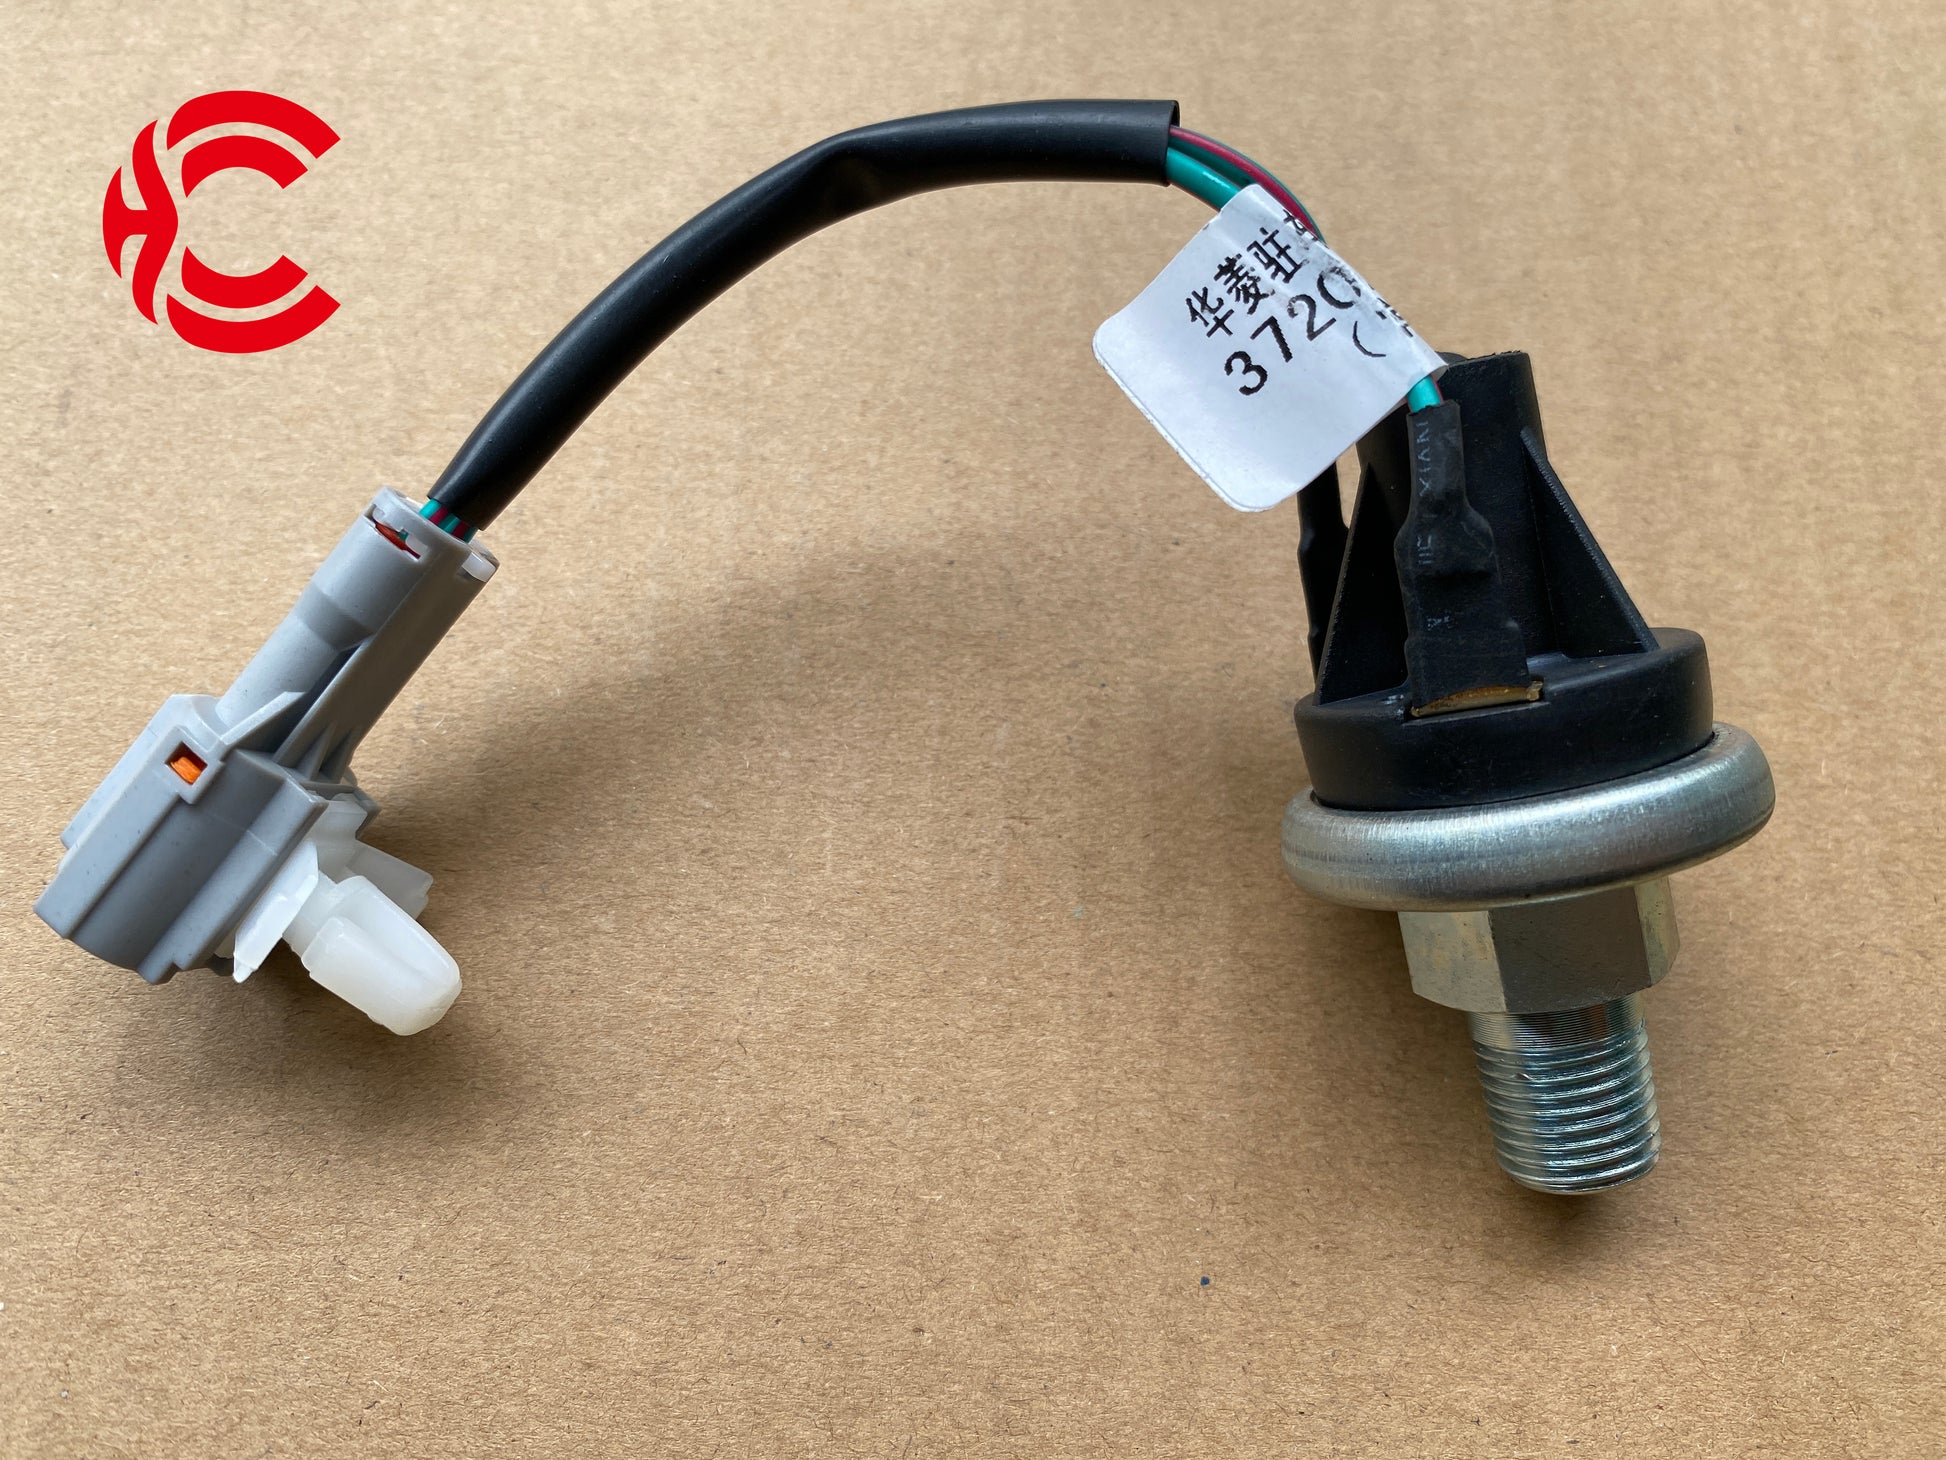 OEM: 3720AD-020Material: ABS metalColor: black silverOrigin: Made in ChinaWeight: 50gPacking List: 1* Brake Light Switch More ServiceWe can provide OEM Manufacturing serviceWe can Be your one-step solution for Auto PartsWe can provide technical scheme for you Feel Free to Contact Us, We will get back to you as soon as possible.